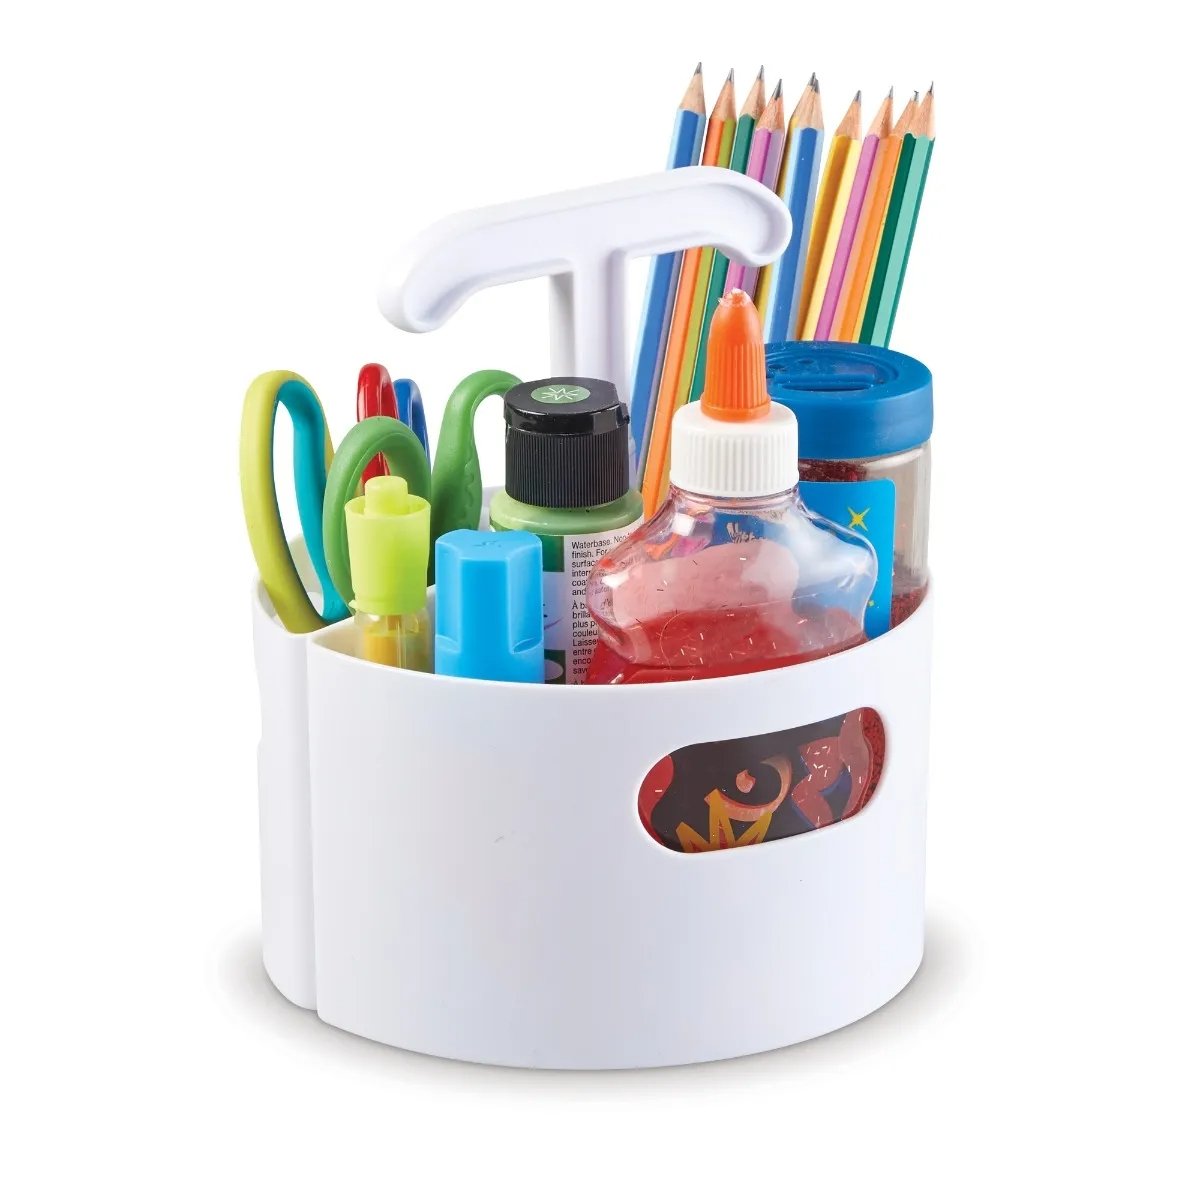 Create-a-Space Mini-Centre - White, Take creativity everywhere it takes you with a mini white version of multicolour Create-A-Space Mini-Centre. Tidy, sort and store maker materials and move them wherever you need them. This easy-carry Create-a-Space Mini-Centre organiser is ideal for classroom and home use. Three removable stationery storage compartments fit onto the easy-grip handle. The Create-A-Space Mini-Centre now in white! Our range of storage caddies brings an easy, convenient way to organise and pr